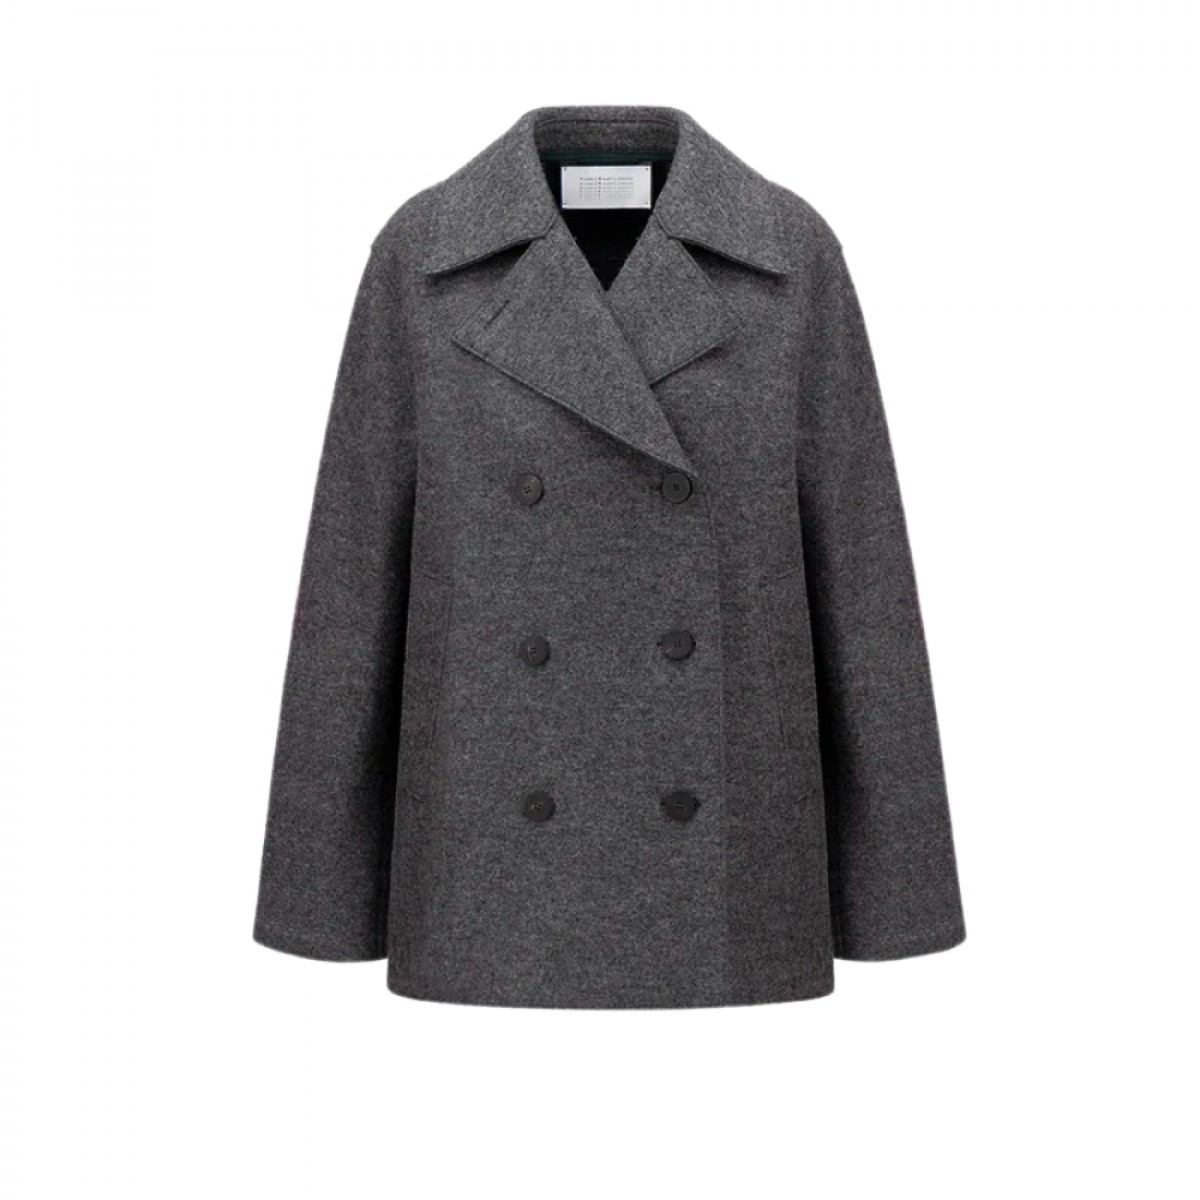 long peacoat pressed wool jacket - middle grey - front